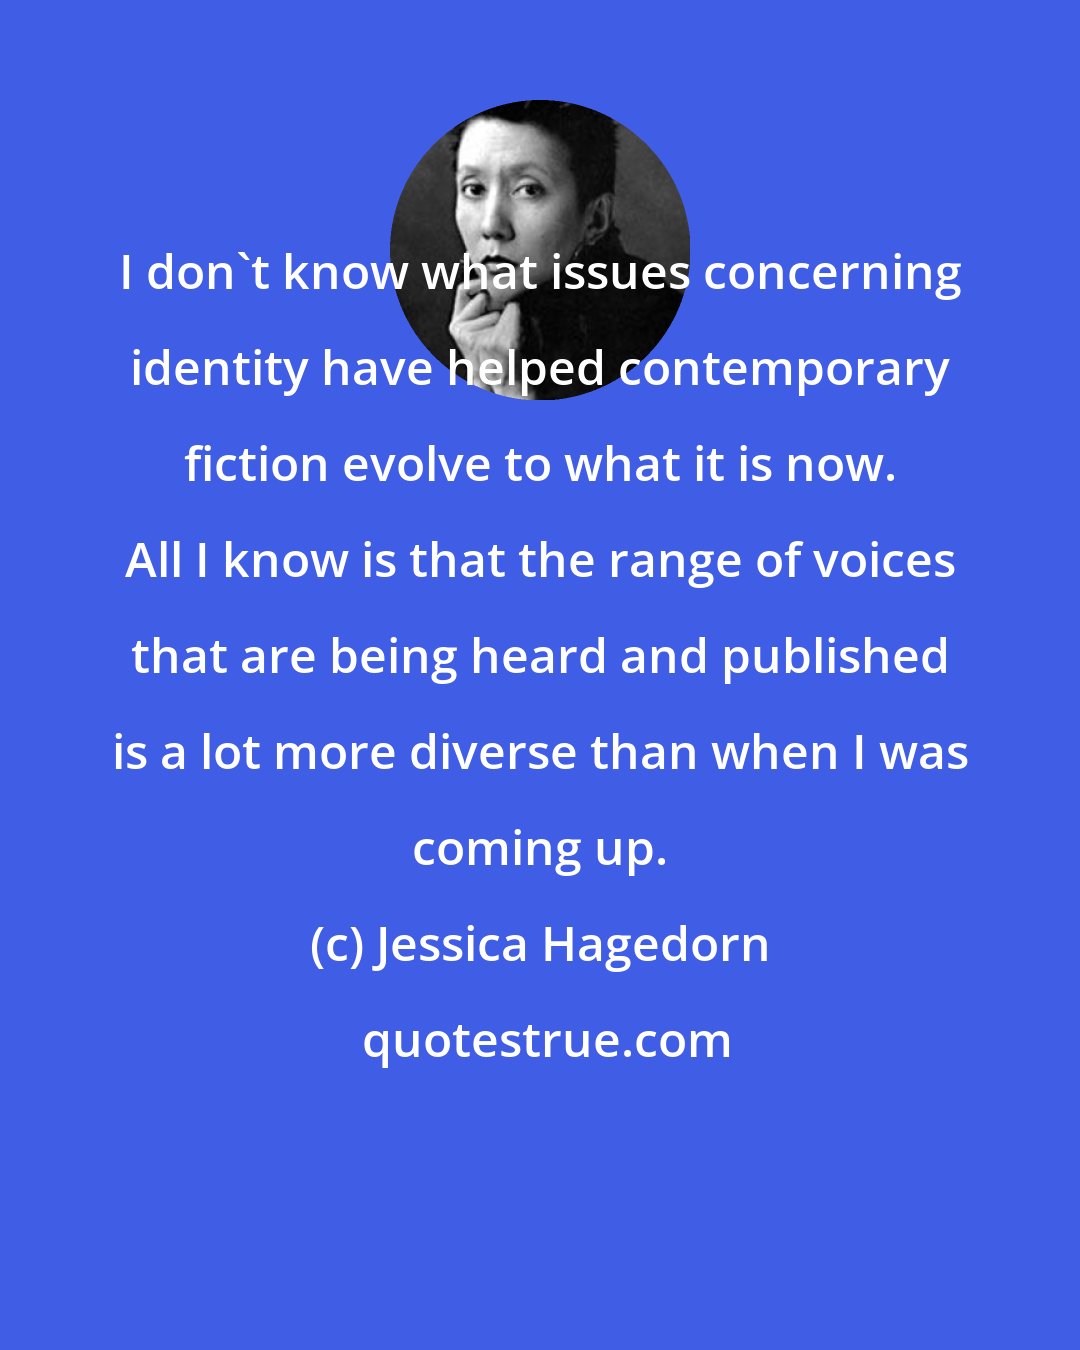 Jessica Hagedorn: I don't know what issues concerning identity have helped contemporary fiction evolve to what it is now. All I know is that the range of voices that are being heard and published is a lot more diverse than when I was coming up.